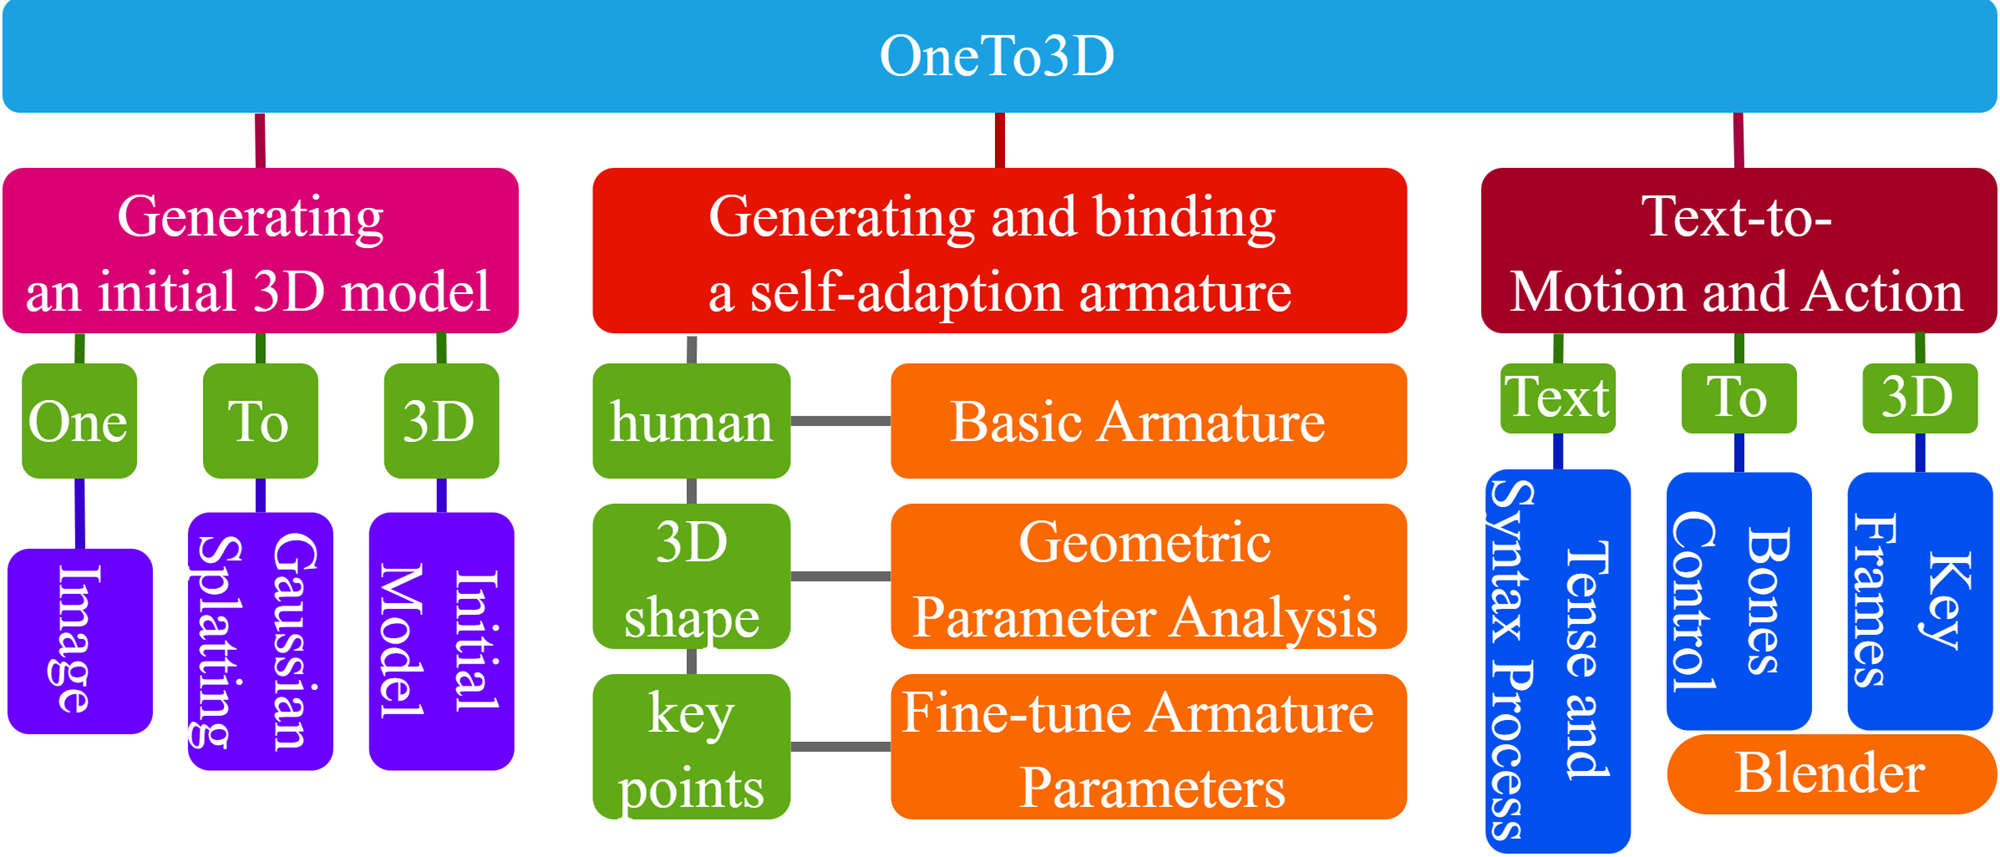 OneTo3D: One Image to Re-editable Dynamic 3D Model and Video Generation